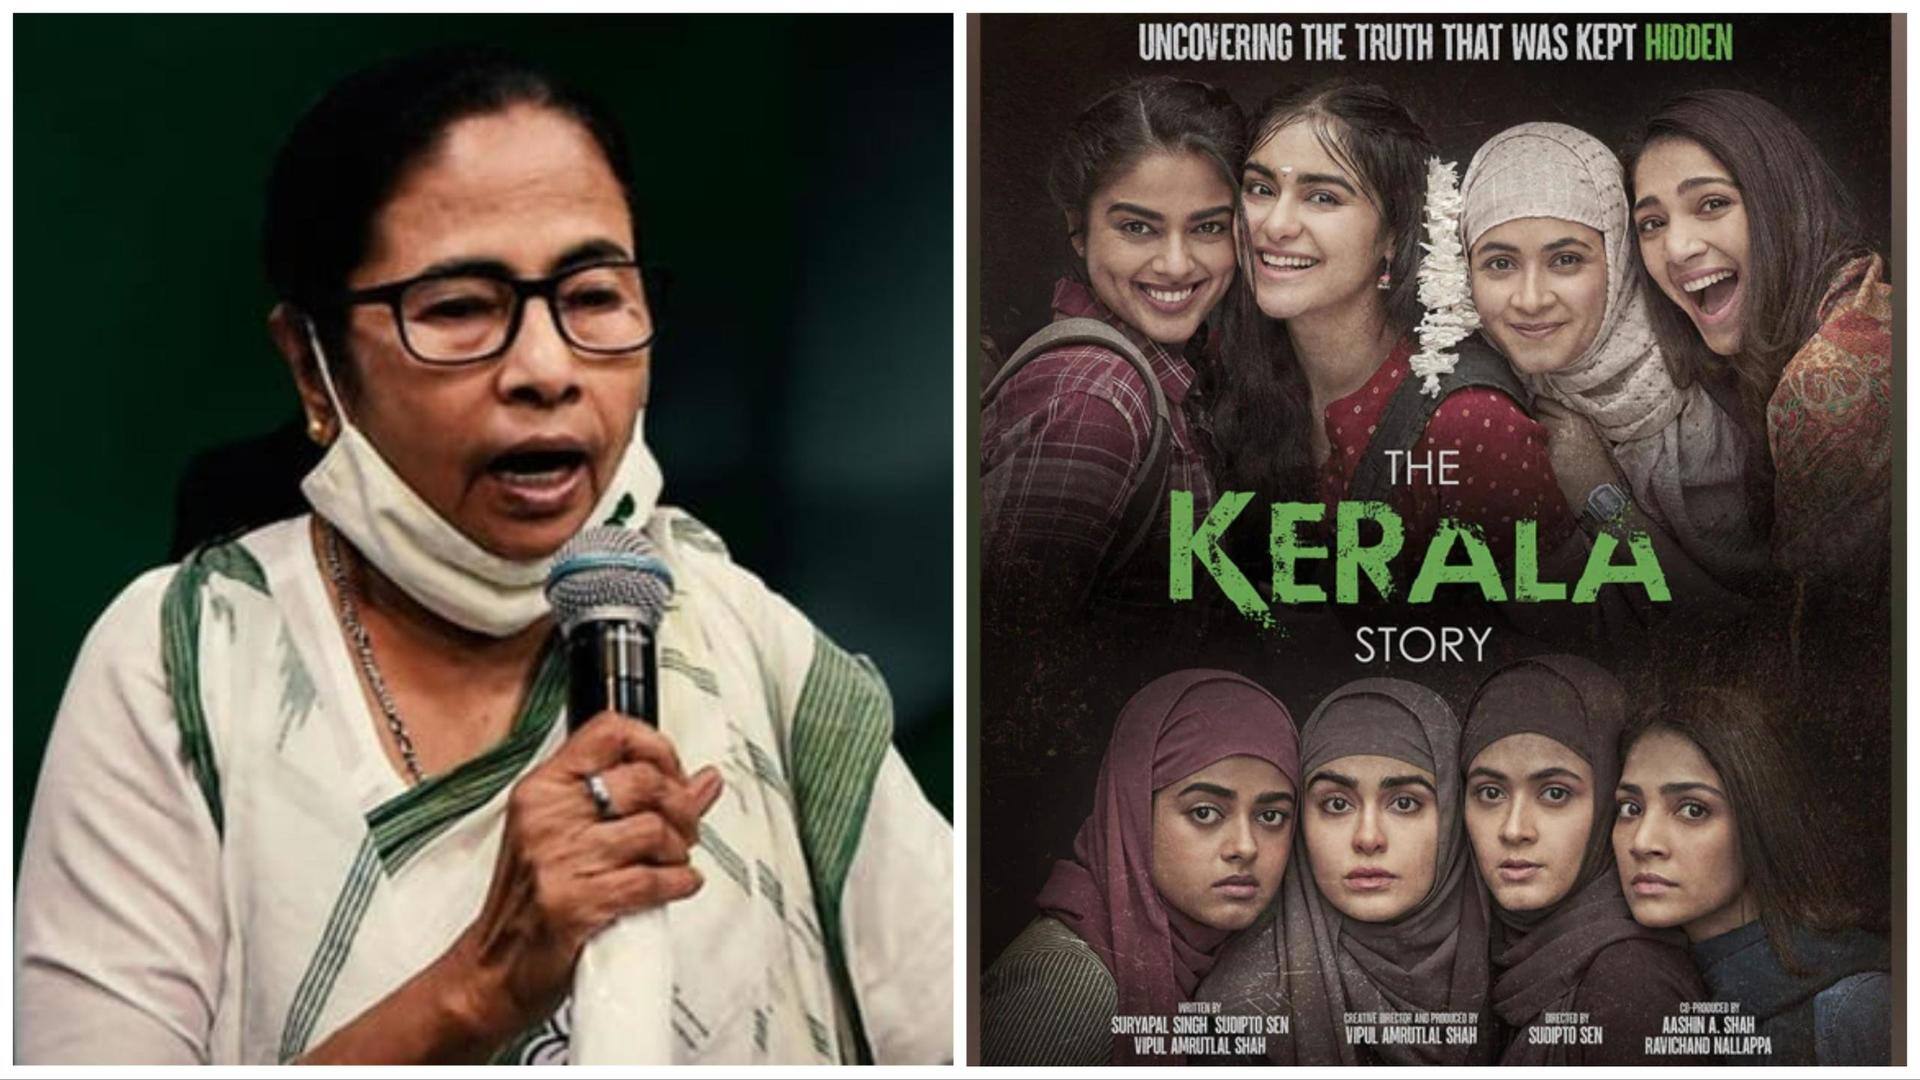 'The Kerala Story' banned in West Bengal: CM Mamata Banerjee